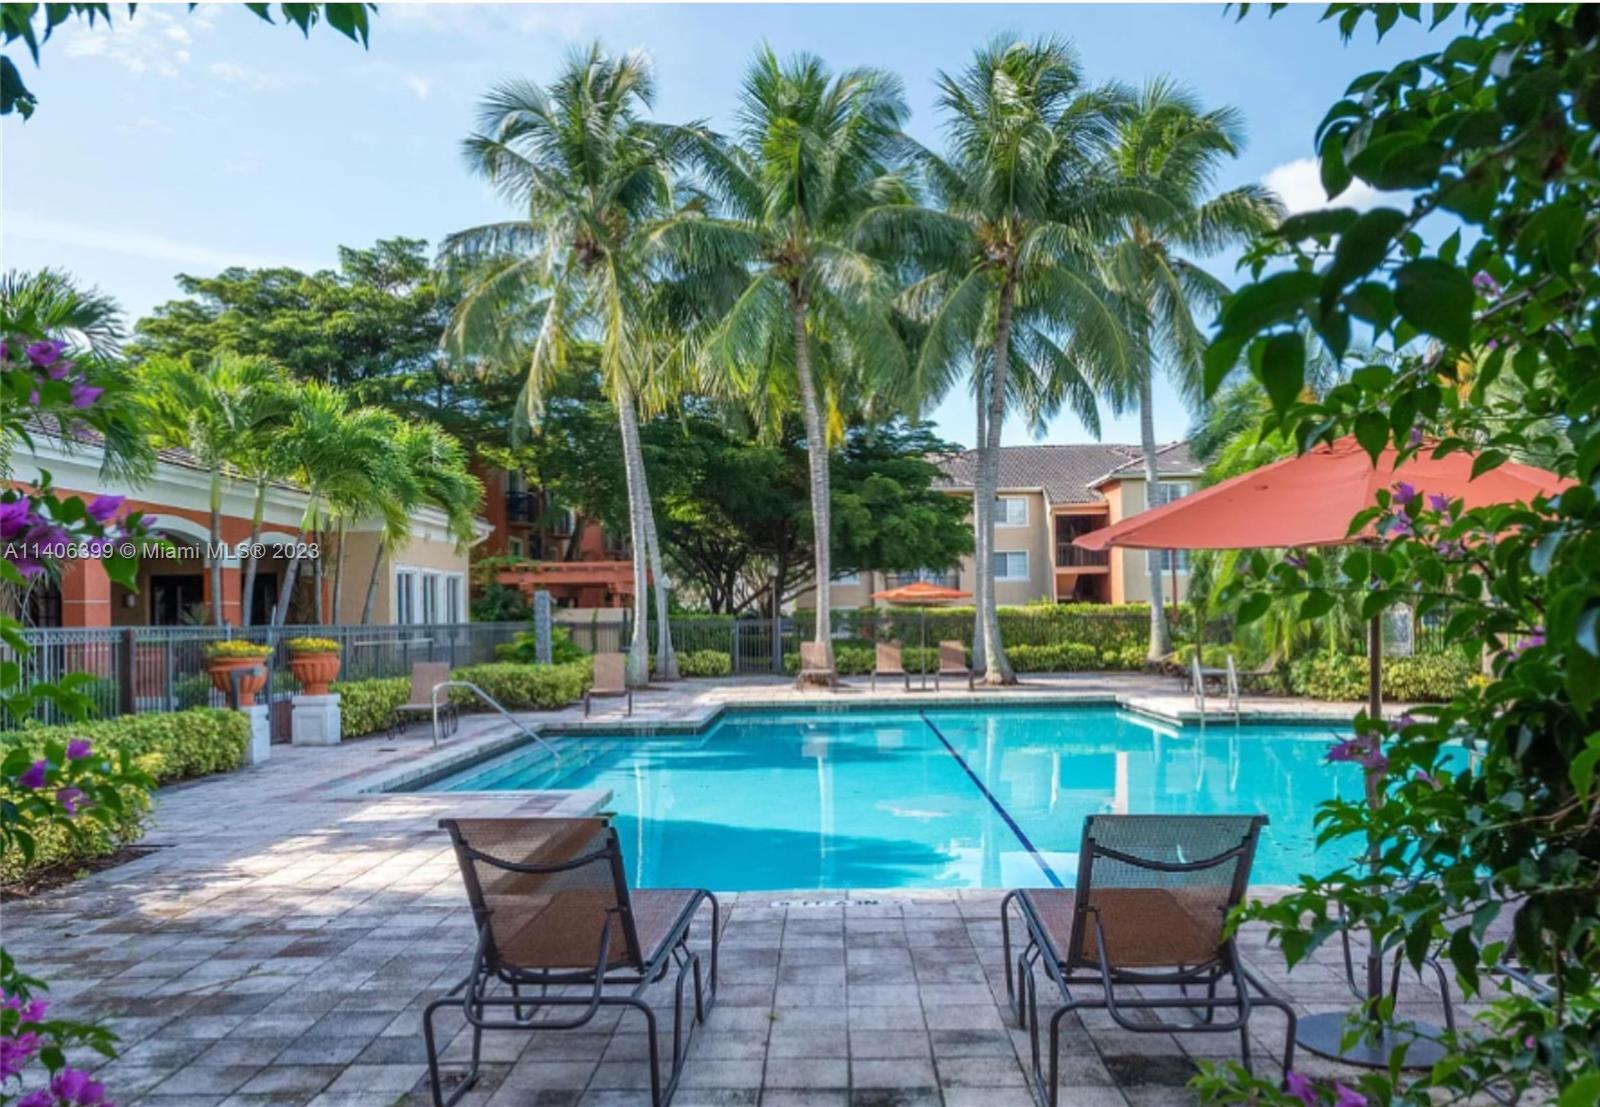 Great opportunity for first-time homebuyers or investors. In beautiful Grand Isles. A unique resort-